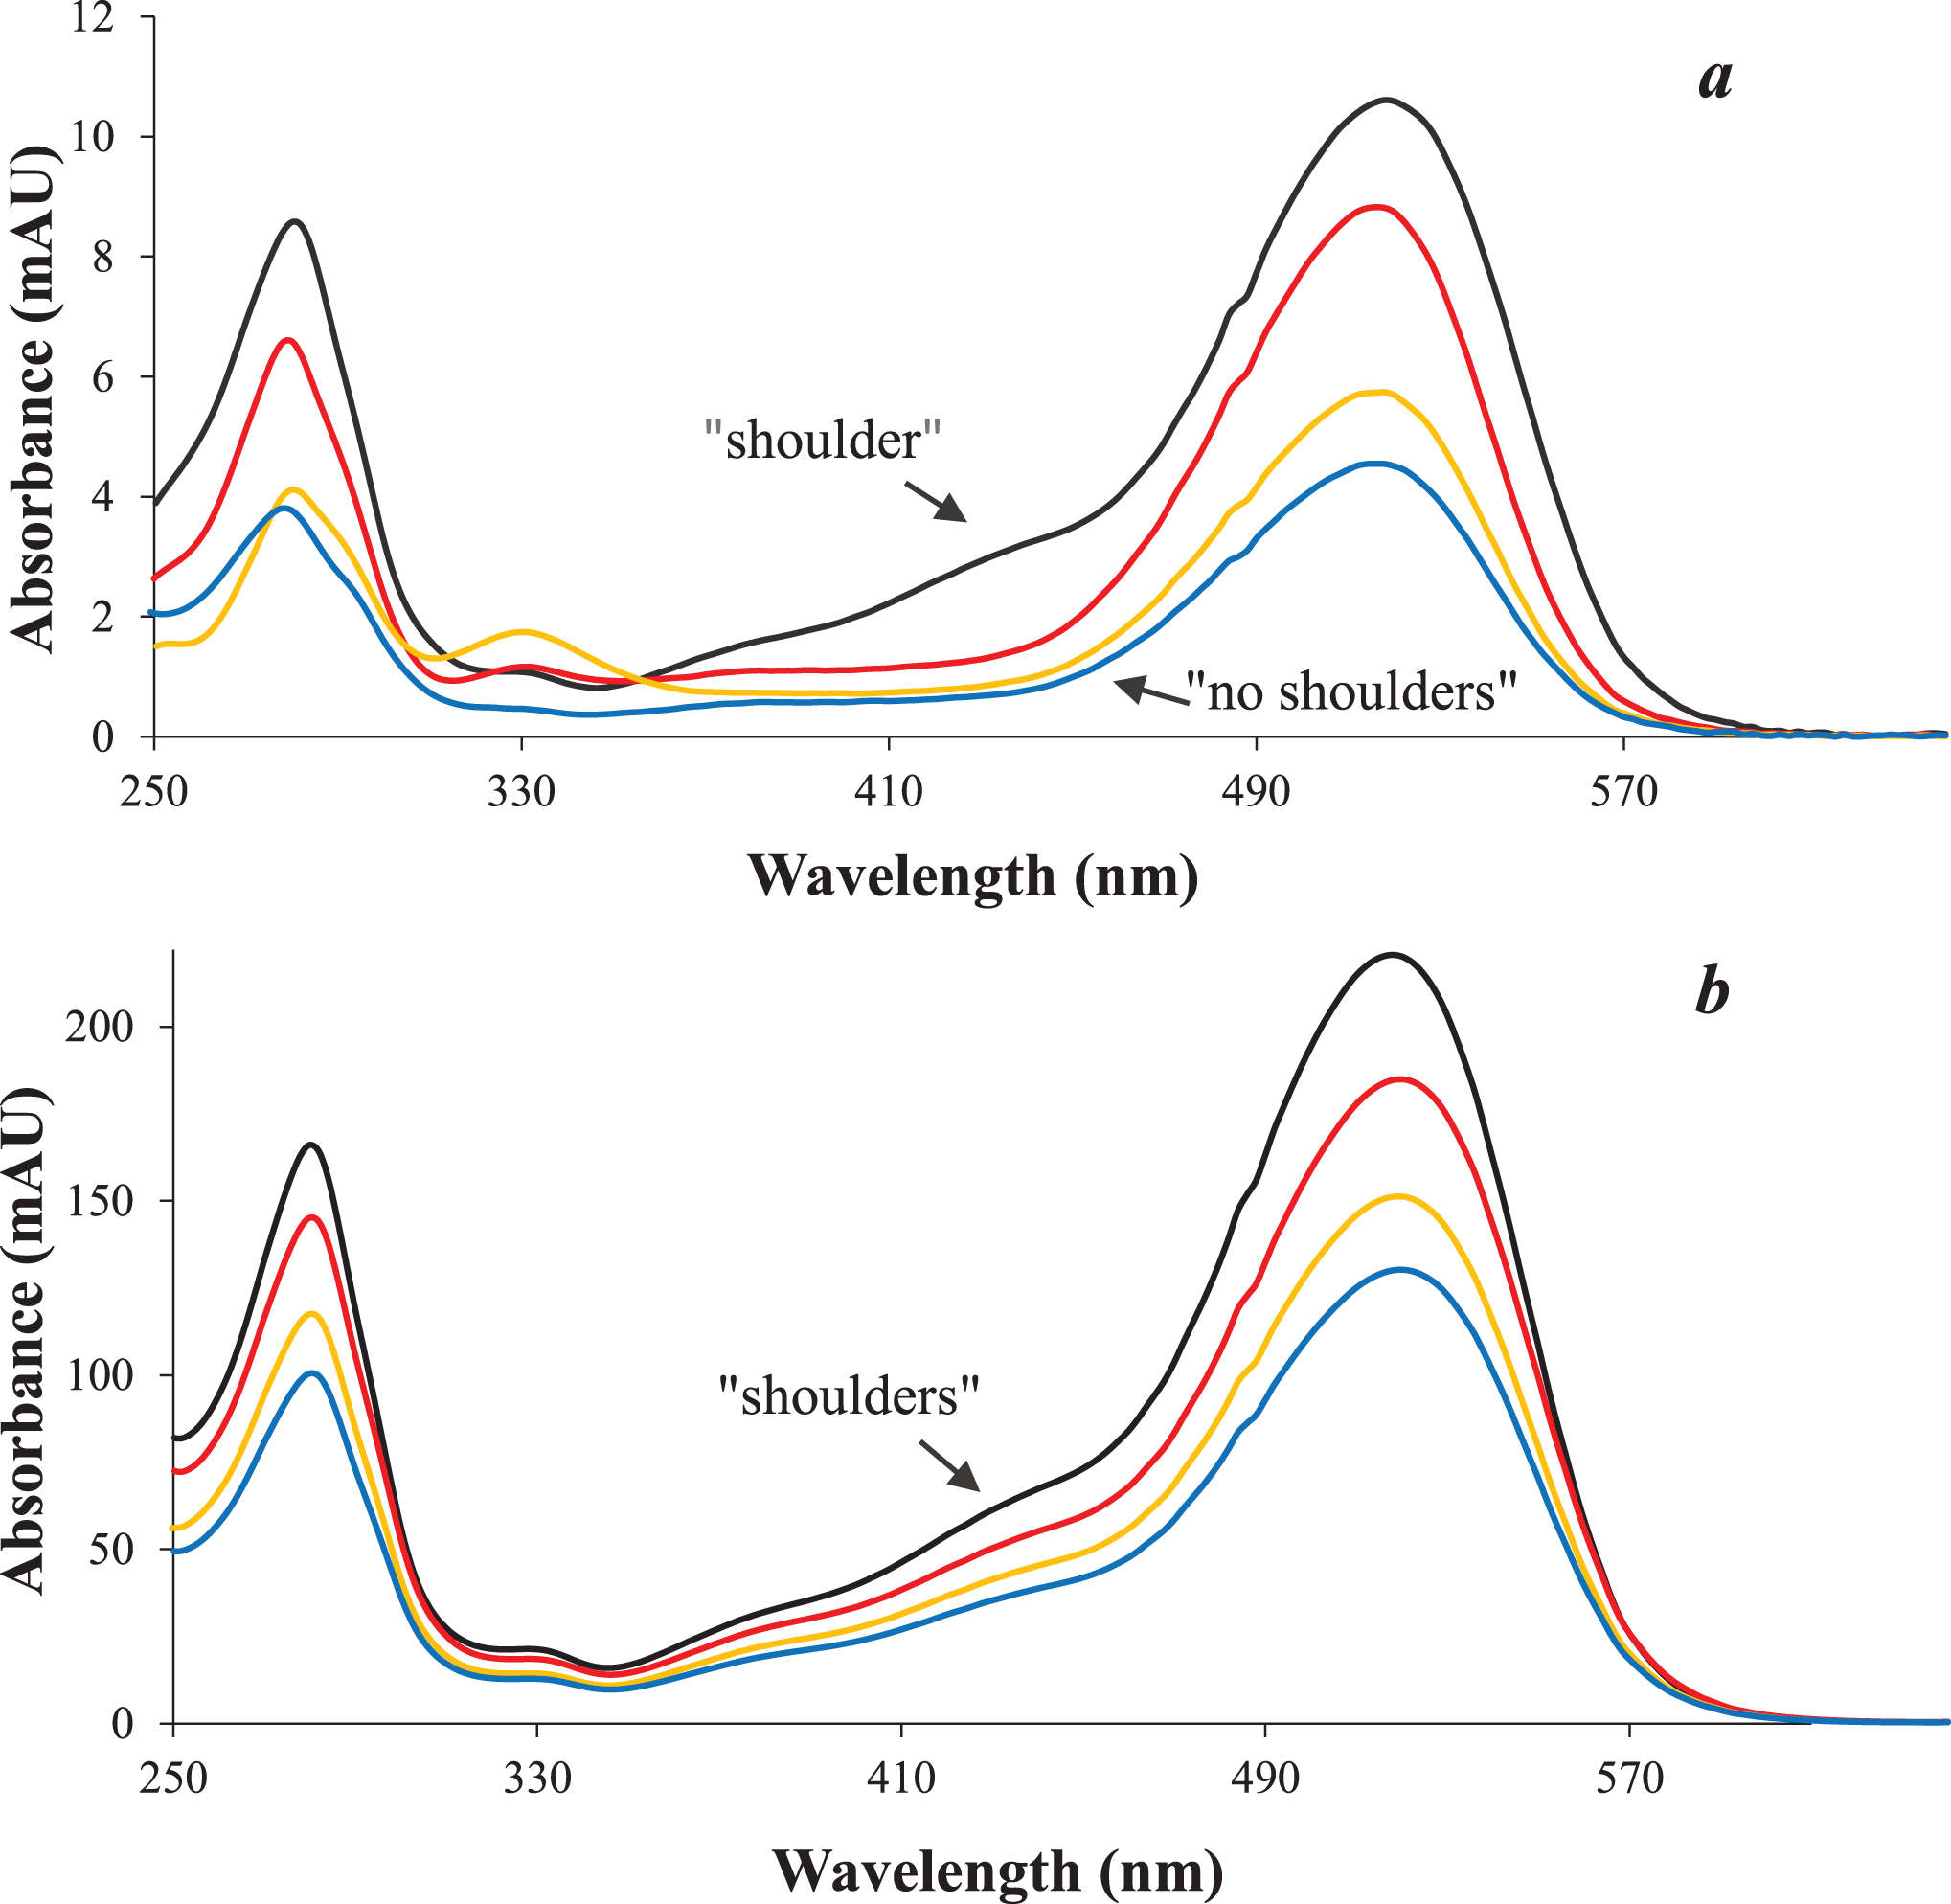 UV absorption spectra corresponding to the presence of cyanidin 3,5-O-diglucosides (a) and cyanidin-3-O-glucosides (b) in elderberry fruit (red line), OE (yellow line) and freeze-dried powder (blue line), compared to the cyanidin-3-O-glucoside standard (black line).